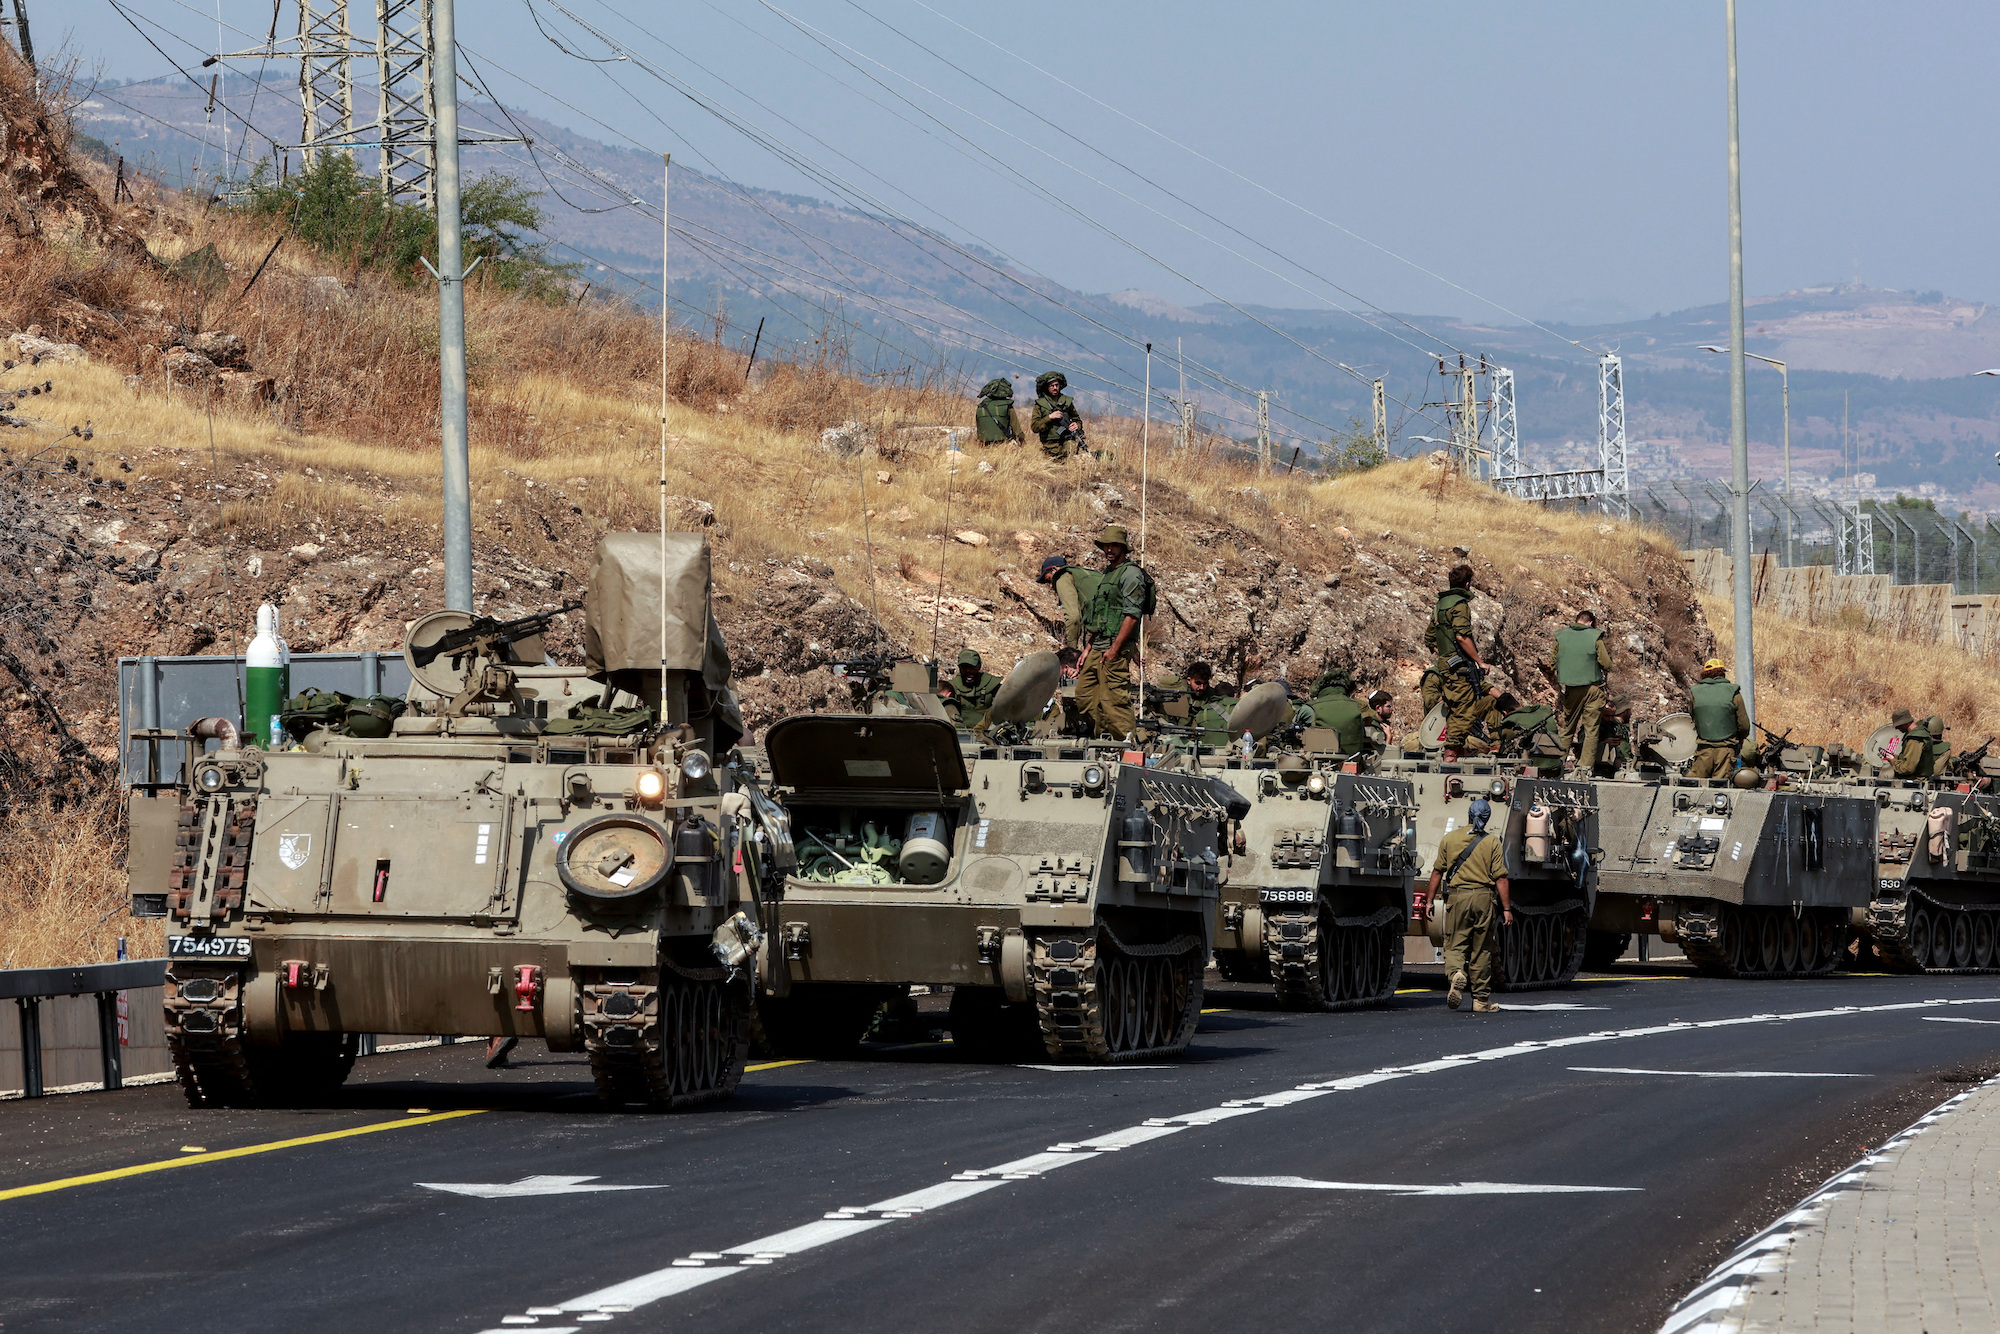 A convoy of Israeli armored vehicles drive on a road near Israel's border with Lebanon on Monday.